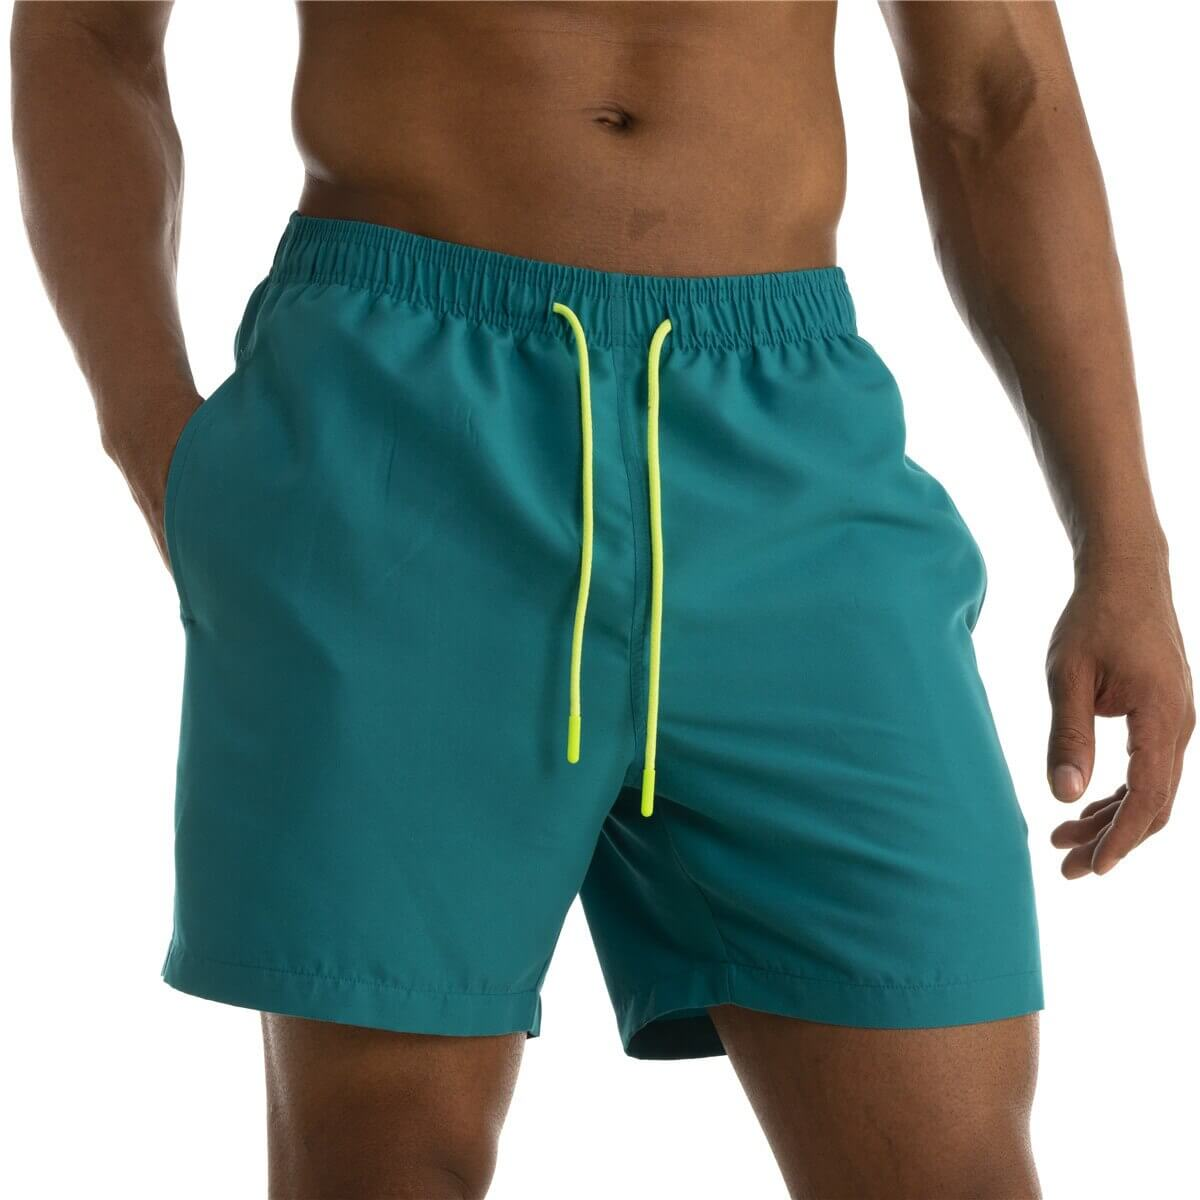 Men's Solid Color Boardshorts with Pockets / Male Swimwear - SF0831